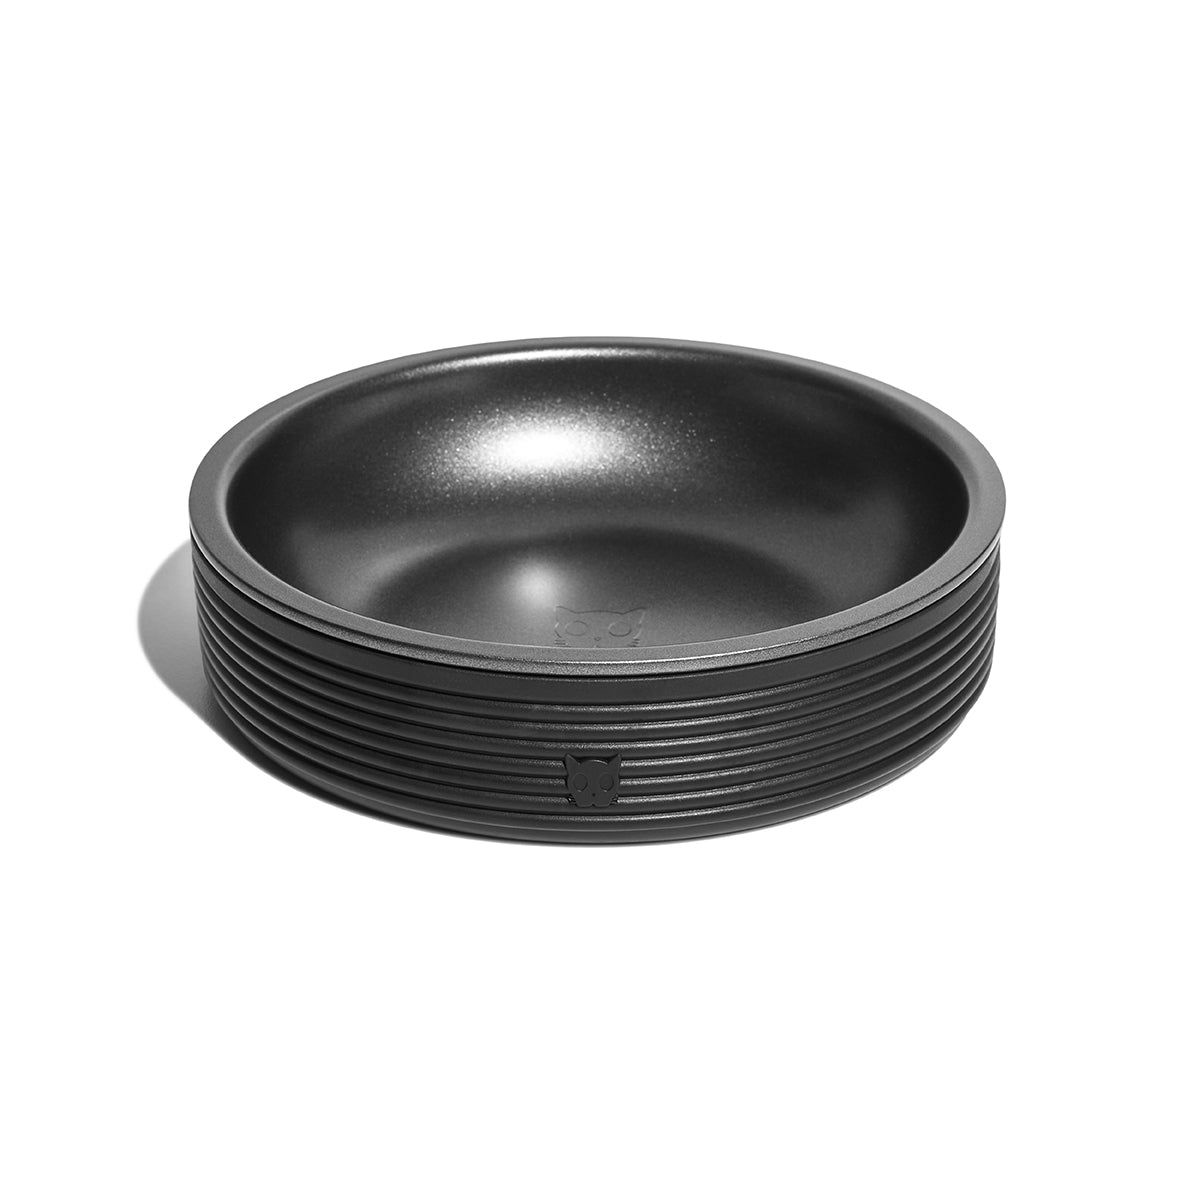 Zee Cat Duo Bowl for Cats - Black